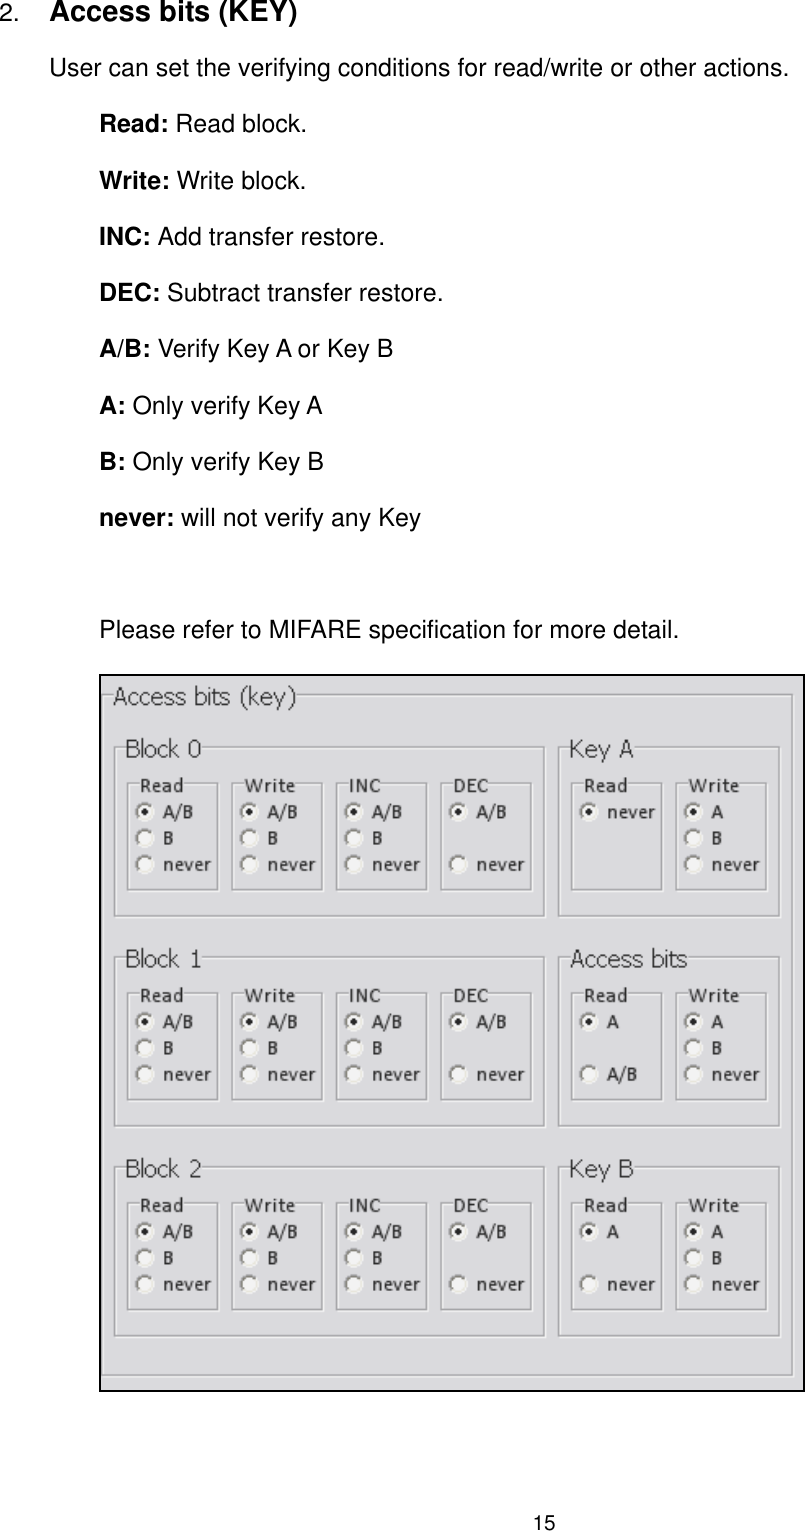 15  2. Access bits (KEY)   User can set the verifying conditions for read/write or other actions. Read: Read block. Write: Write block. INC: Add transfer restore. DEC: Subtract transfer restore. A/B: Verify Key A or Key B A: Only verify Key A B: Only verify Key B never: will not verify any Key  Please refer to MIFARE specification for more detail.    